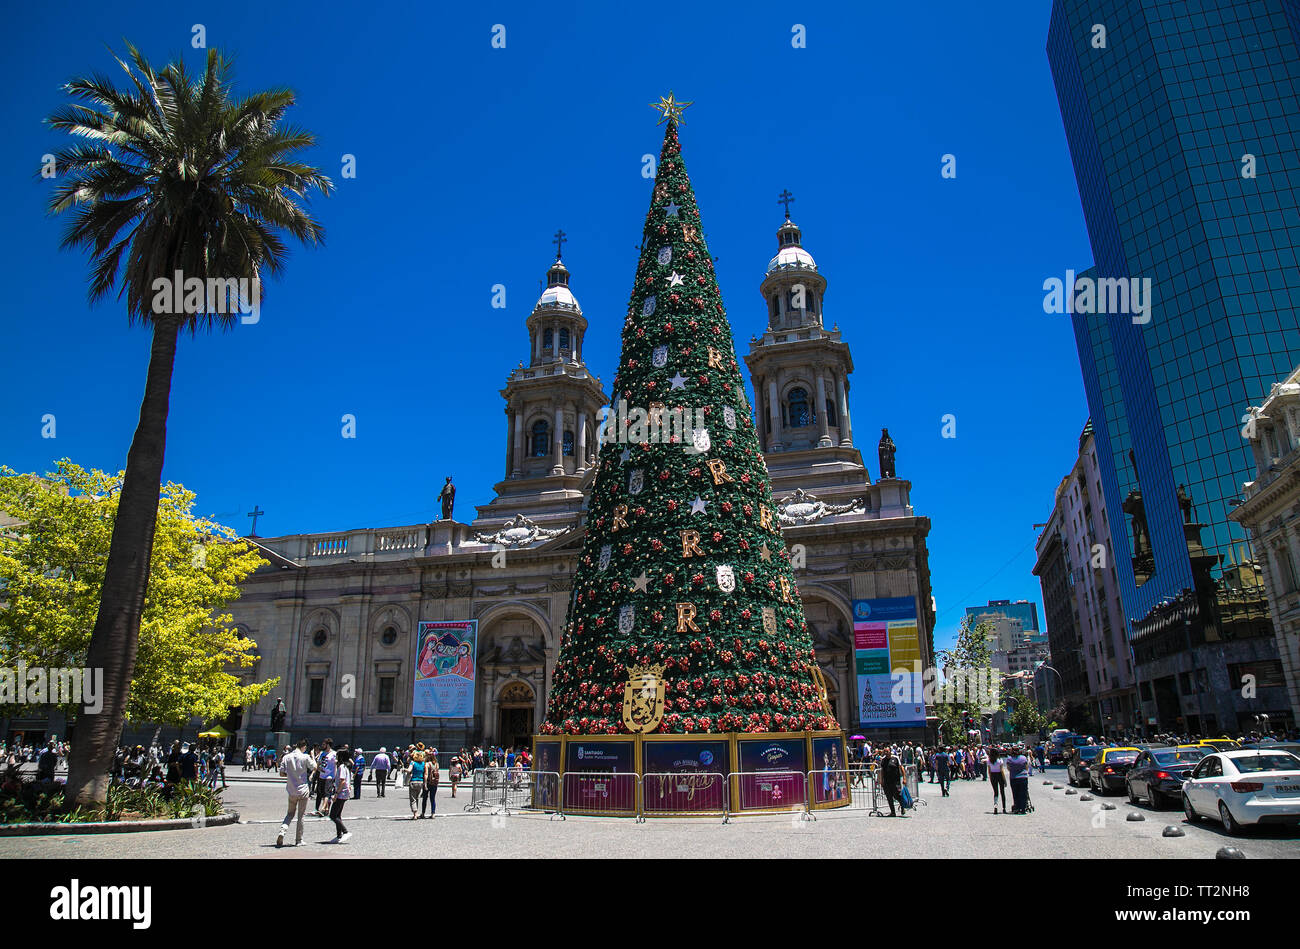 Santiago, Chile - Dec 27, 2018: Christmas tree decorated with hundreds of rag dolls in the Plaza de Armas, Santiago, capital of Chile. Stock Photo